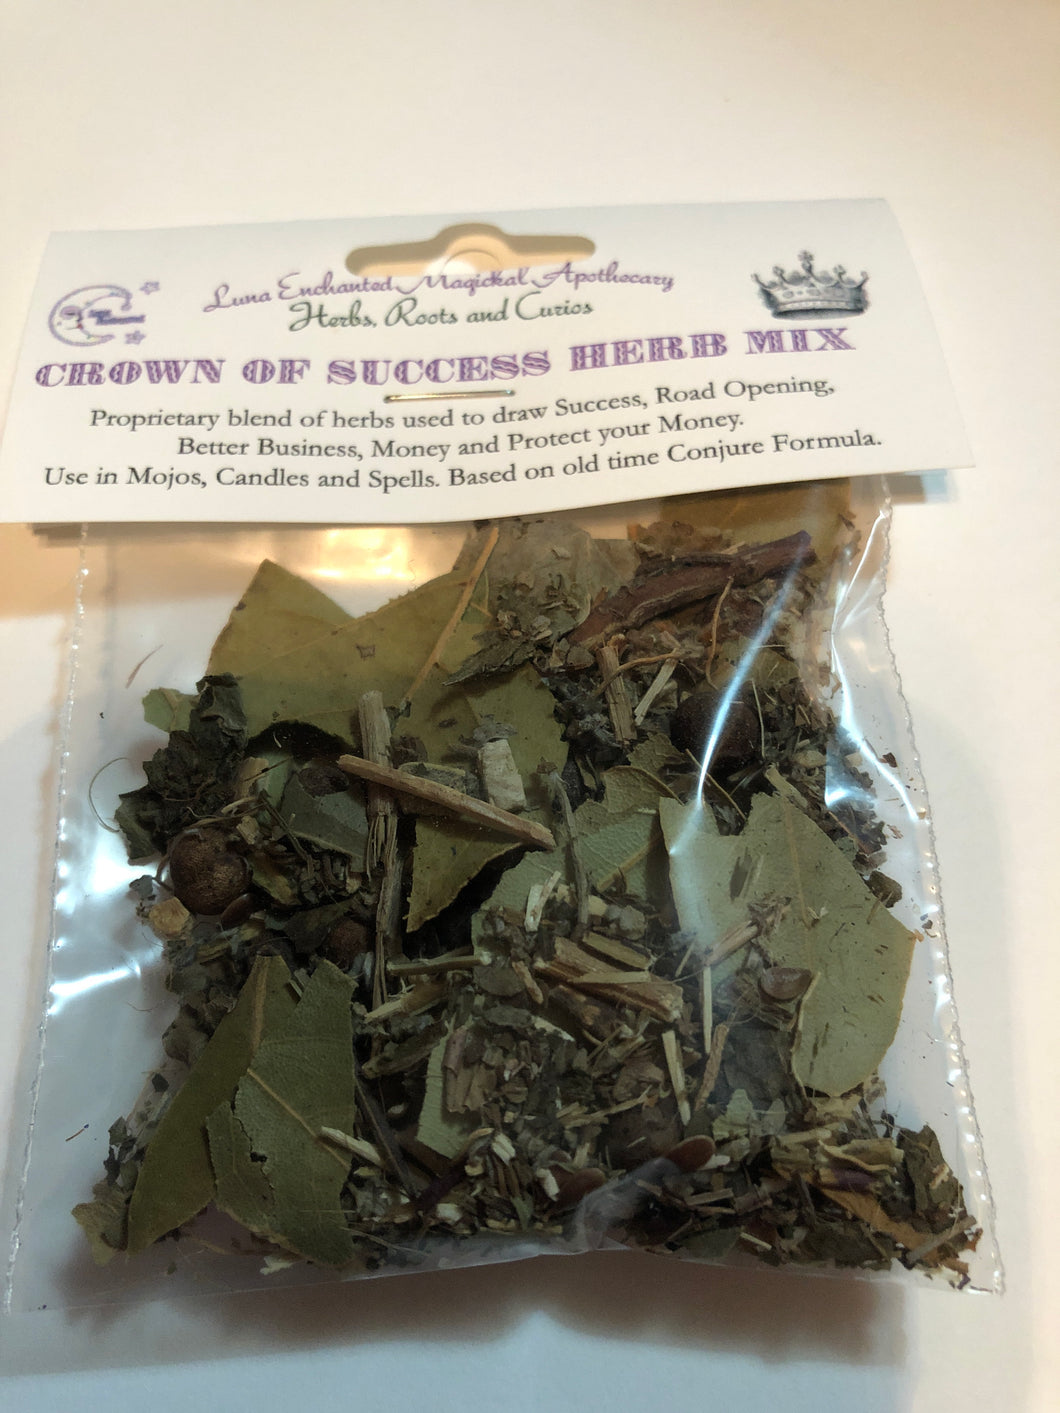 Crown of Success Herb Mix